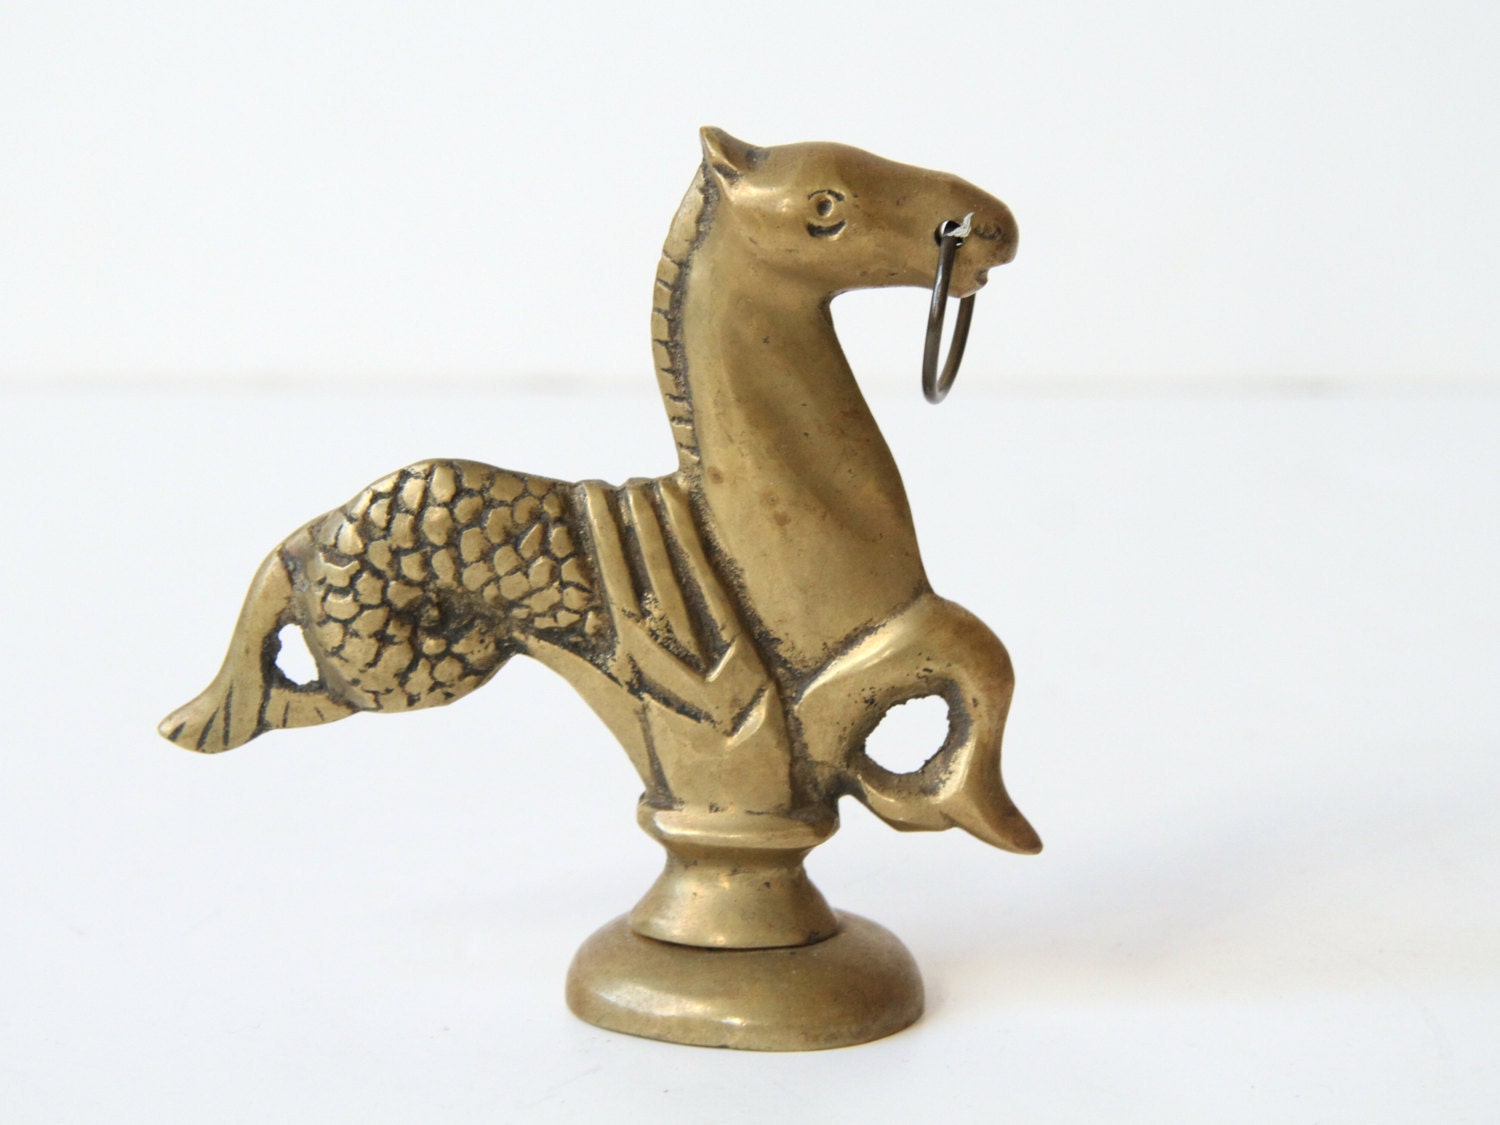 Antique Brass Fixture - Hippocamp Mythical Horse Mermaid